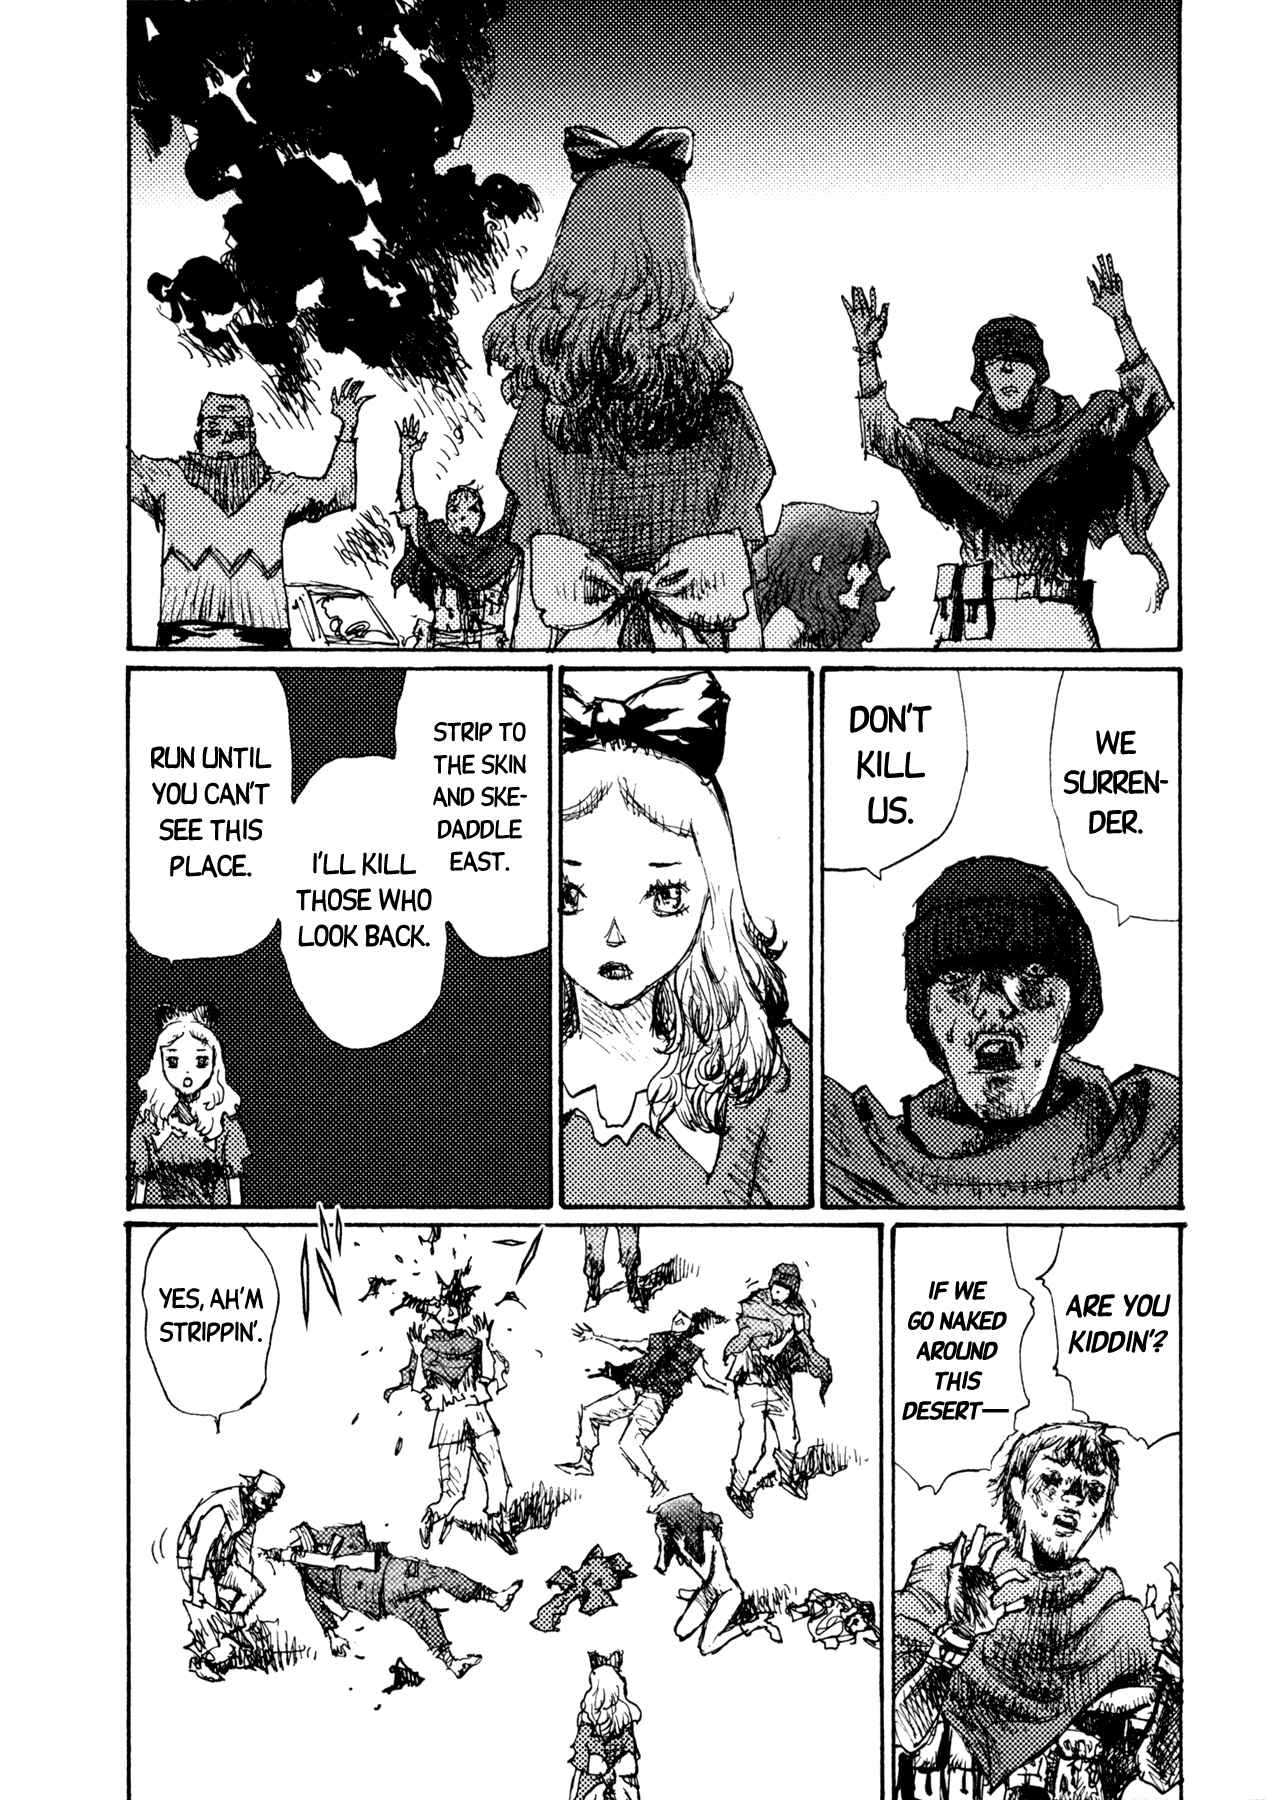 Alice from Hell Vol. 1 Ch. 1 Surrounded By Idiots